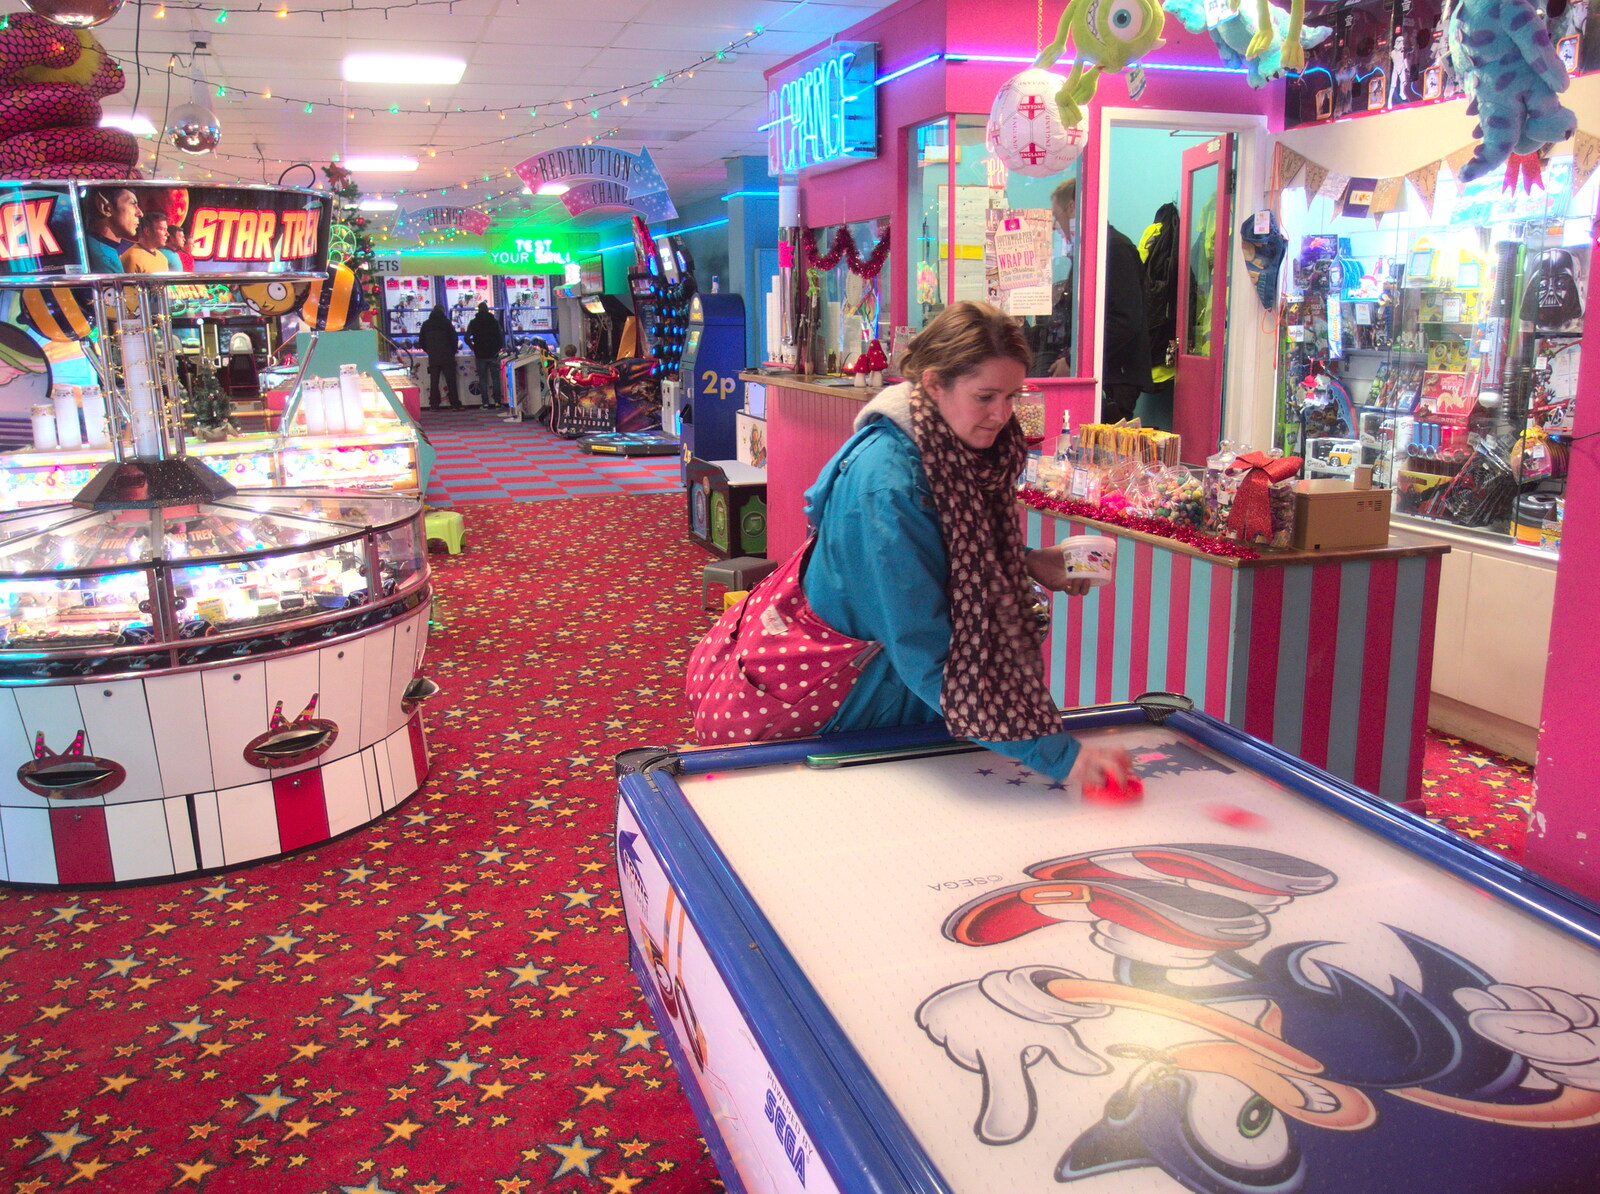 Isobel does one-handed Air Hockey from Southwold Seaside Pier, Southwold, Suffolk - 18th December 2016